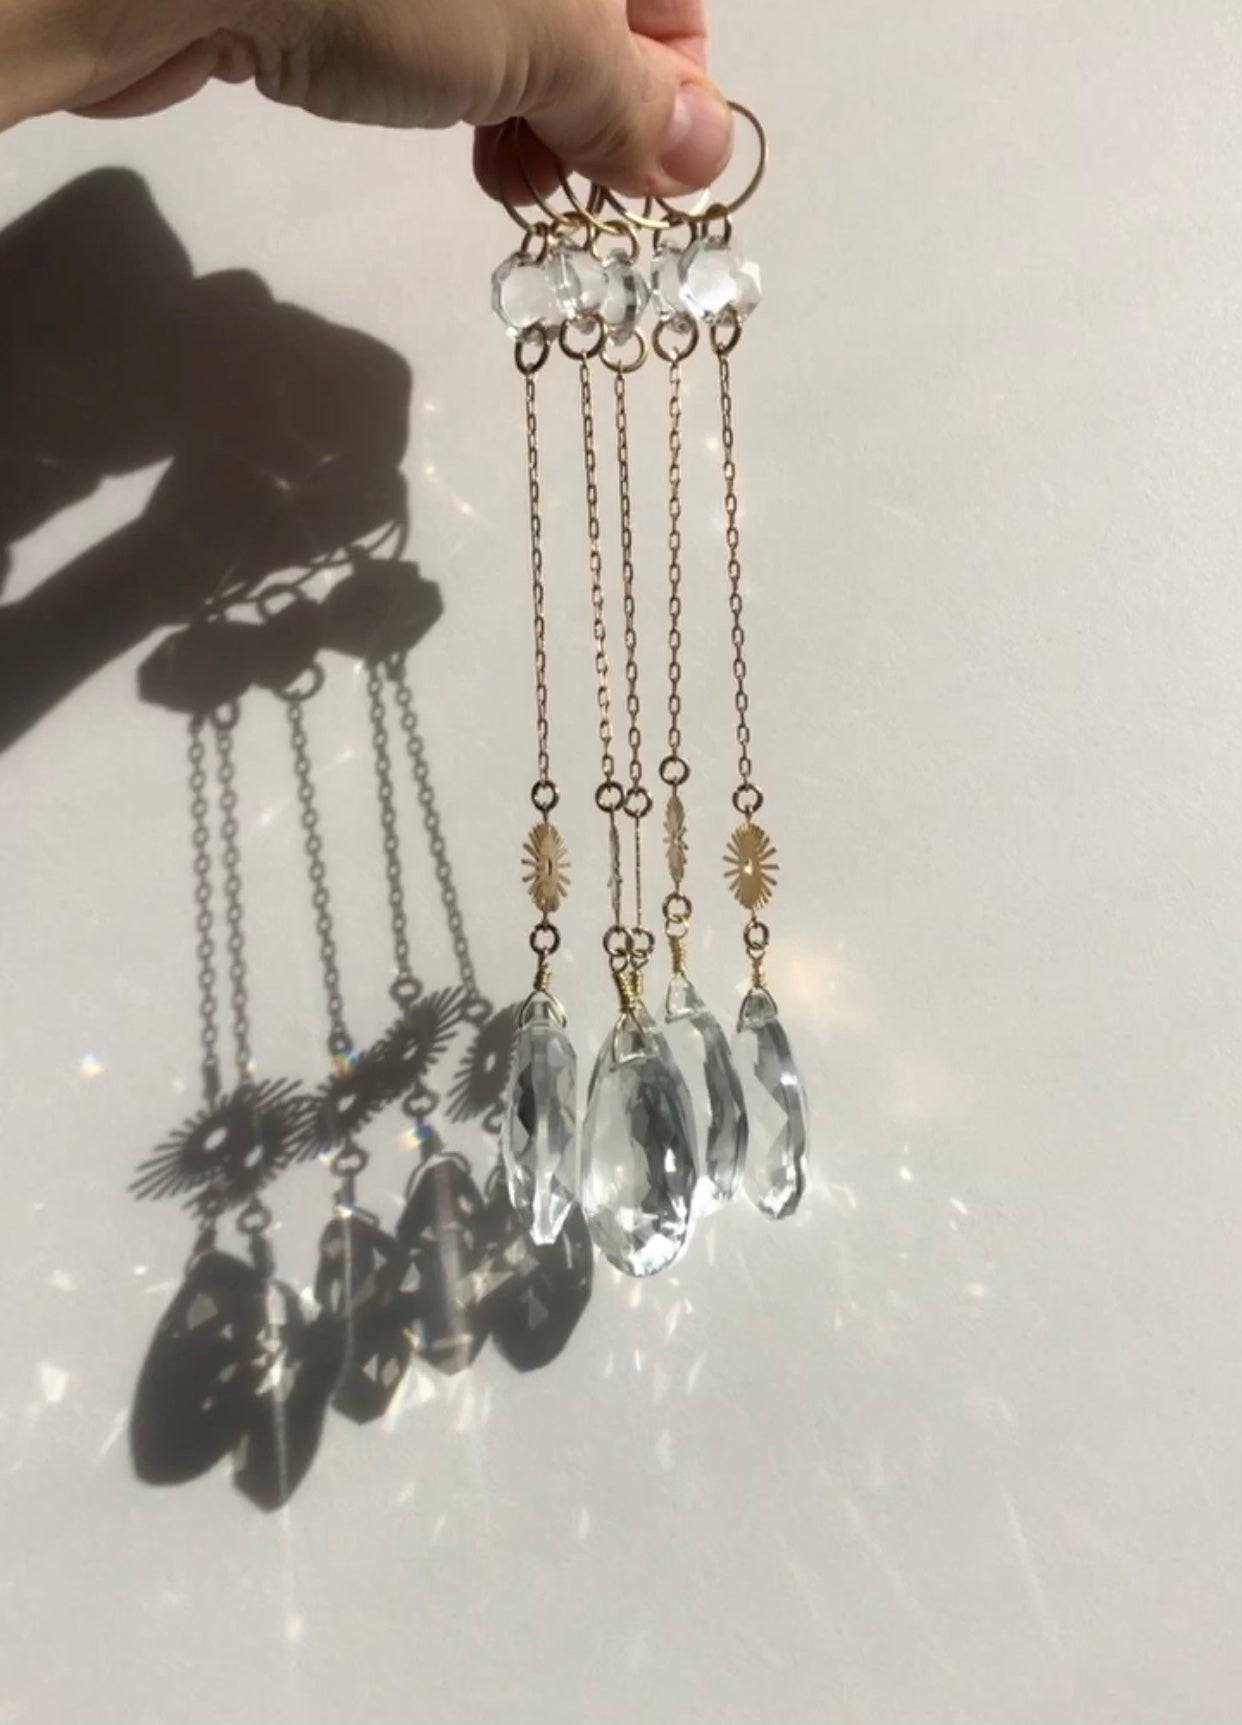 Add some magic to your drive! Artisan-crafted mini sun catcher perfect for your car or other small space. Made from brushed brass sheet, chain and vintage faceted crystals. Ready to hang. 